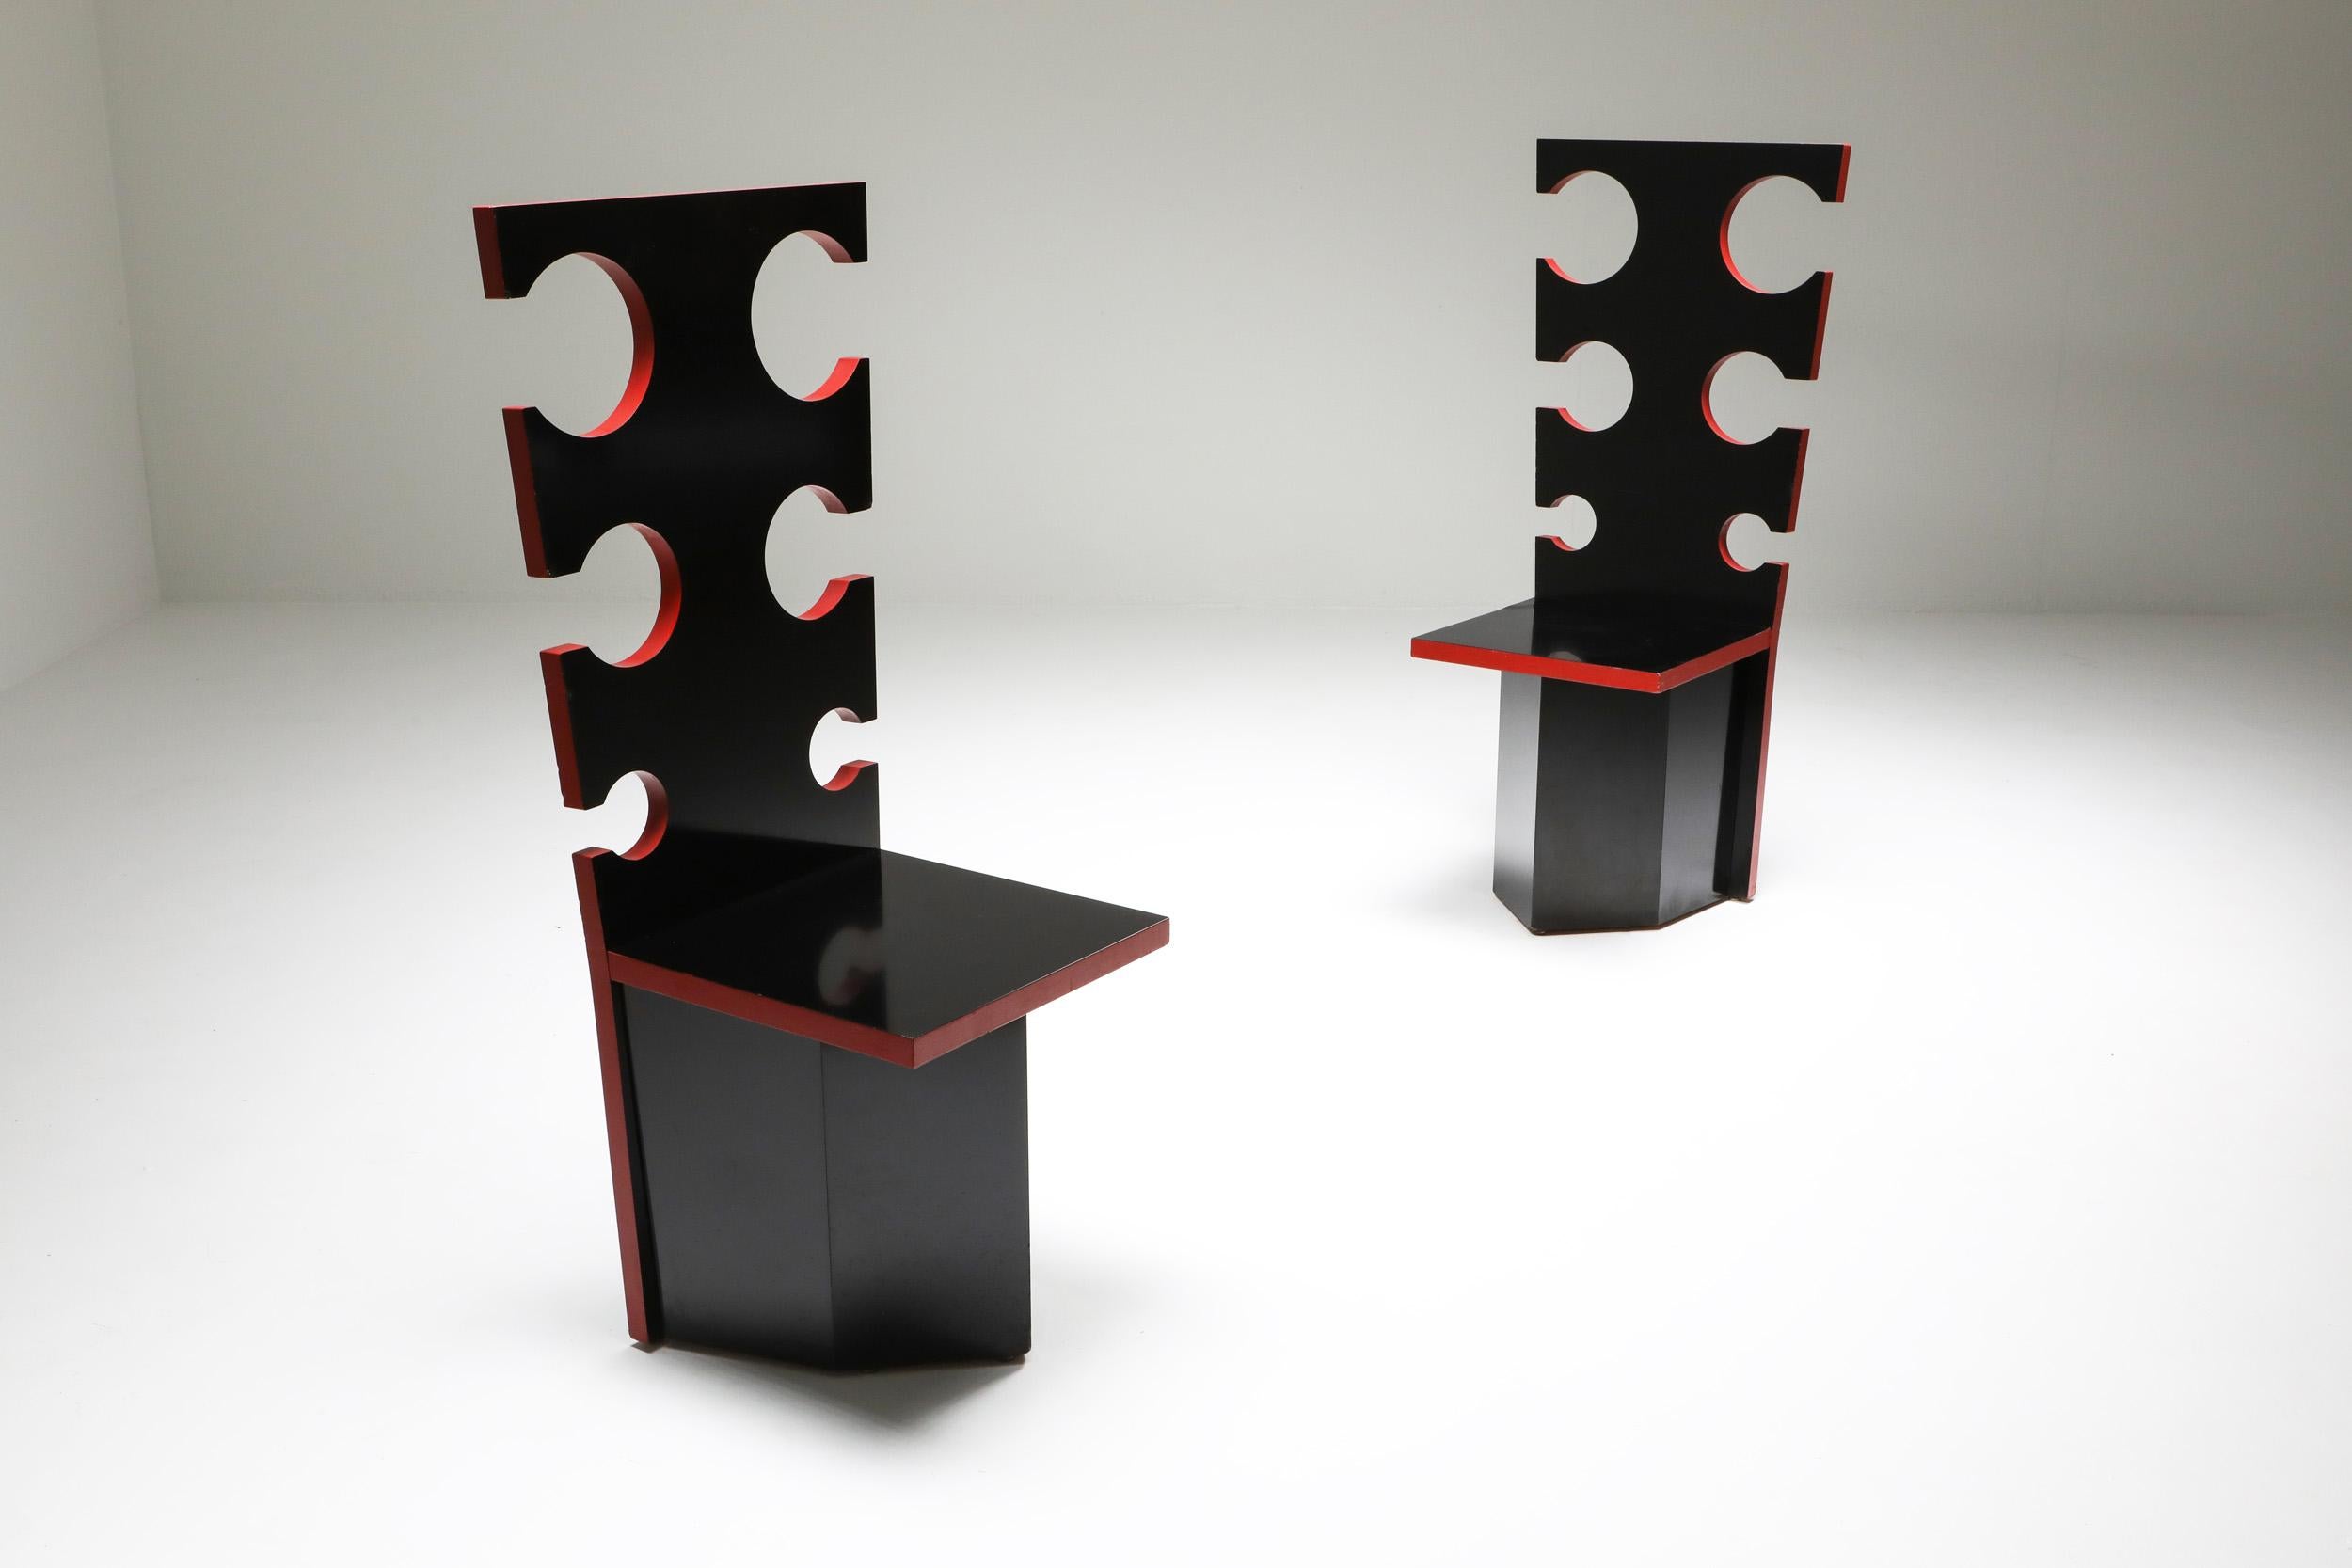 Black lacquer with red edges by Max Papiri, functional art, collectible design 
Designed on request by and for the private home of Mario Sabot. The intriguing design shows straight cut-out backrests and rectangular seats on a polygonal base. The